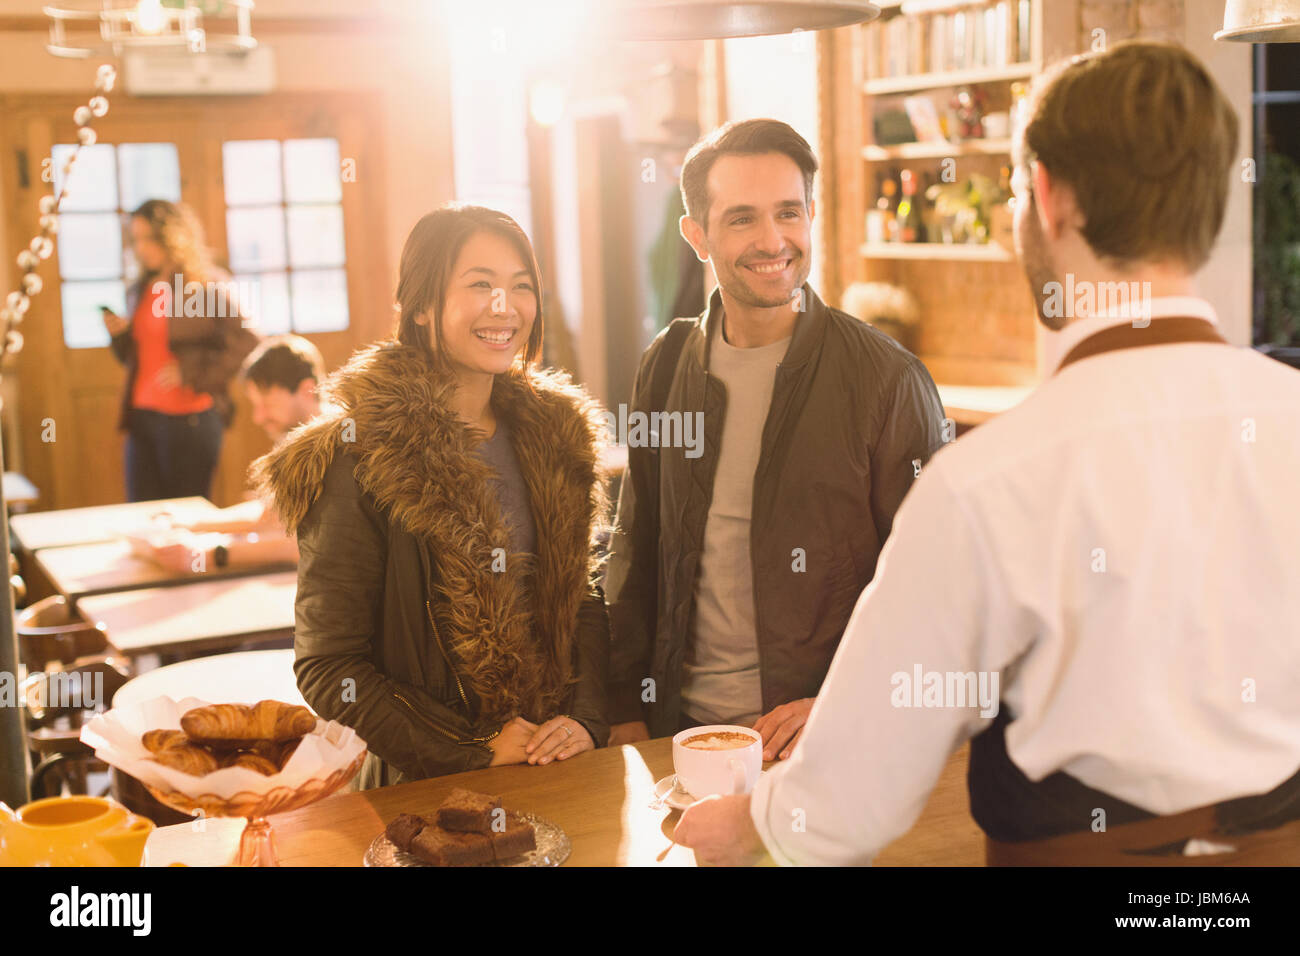 Barista serving coffee to couple at counter in cafe Stock Photo